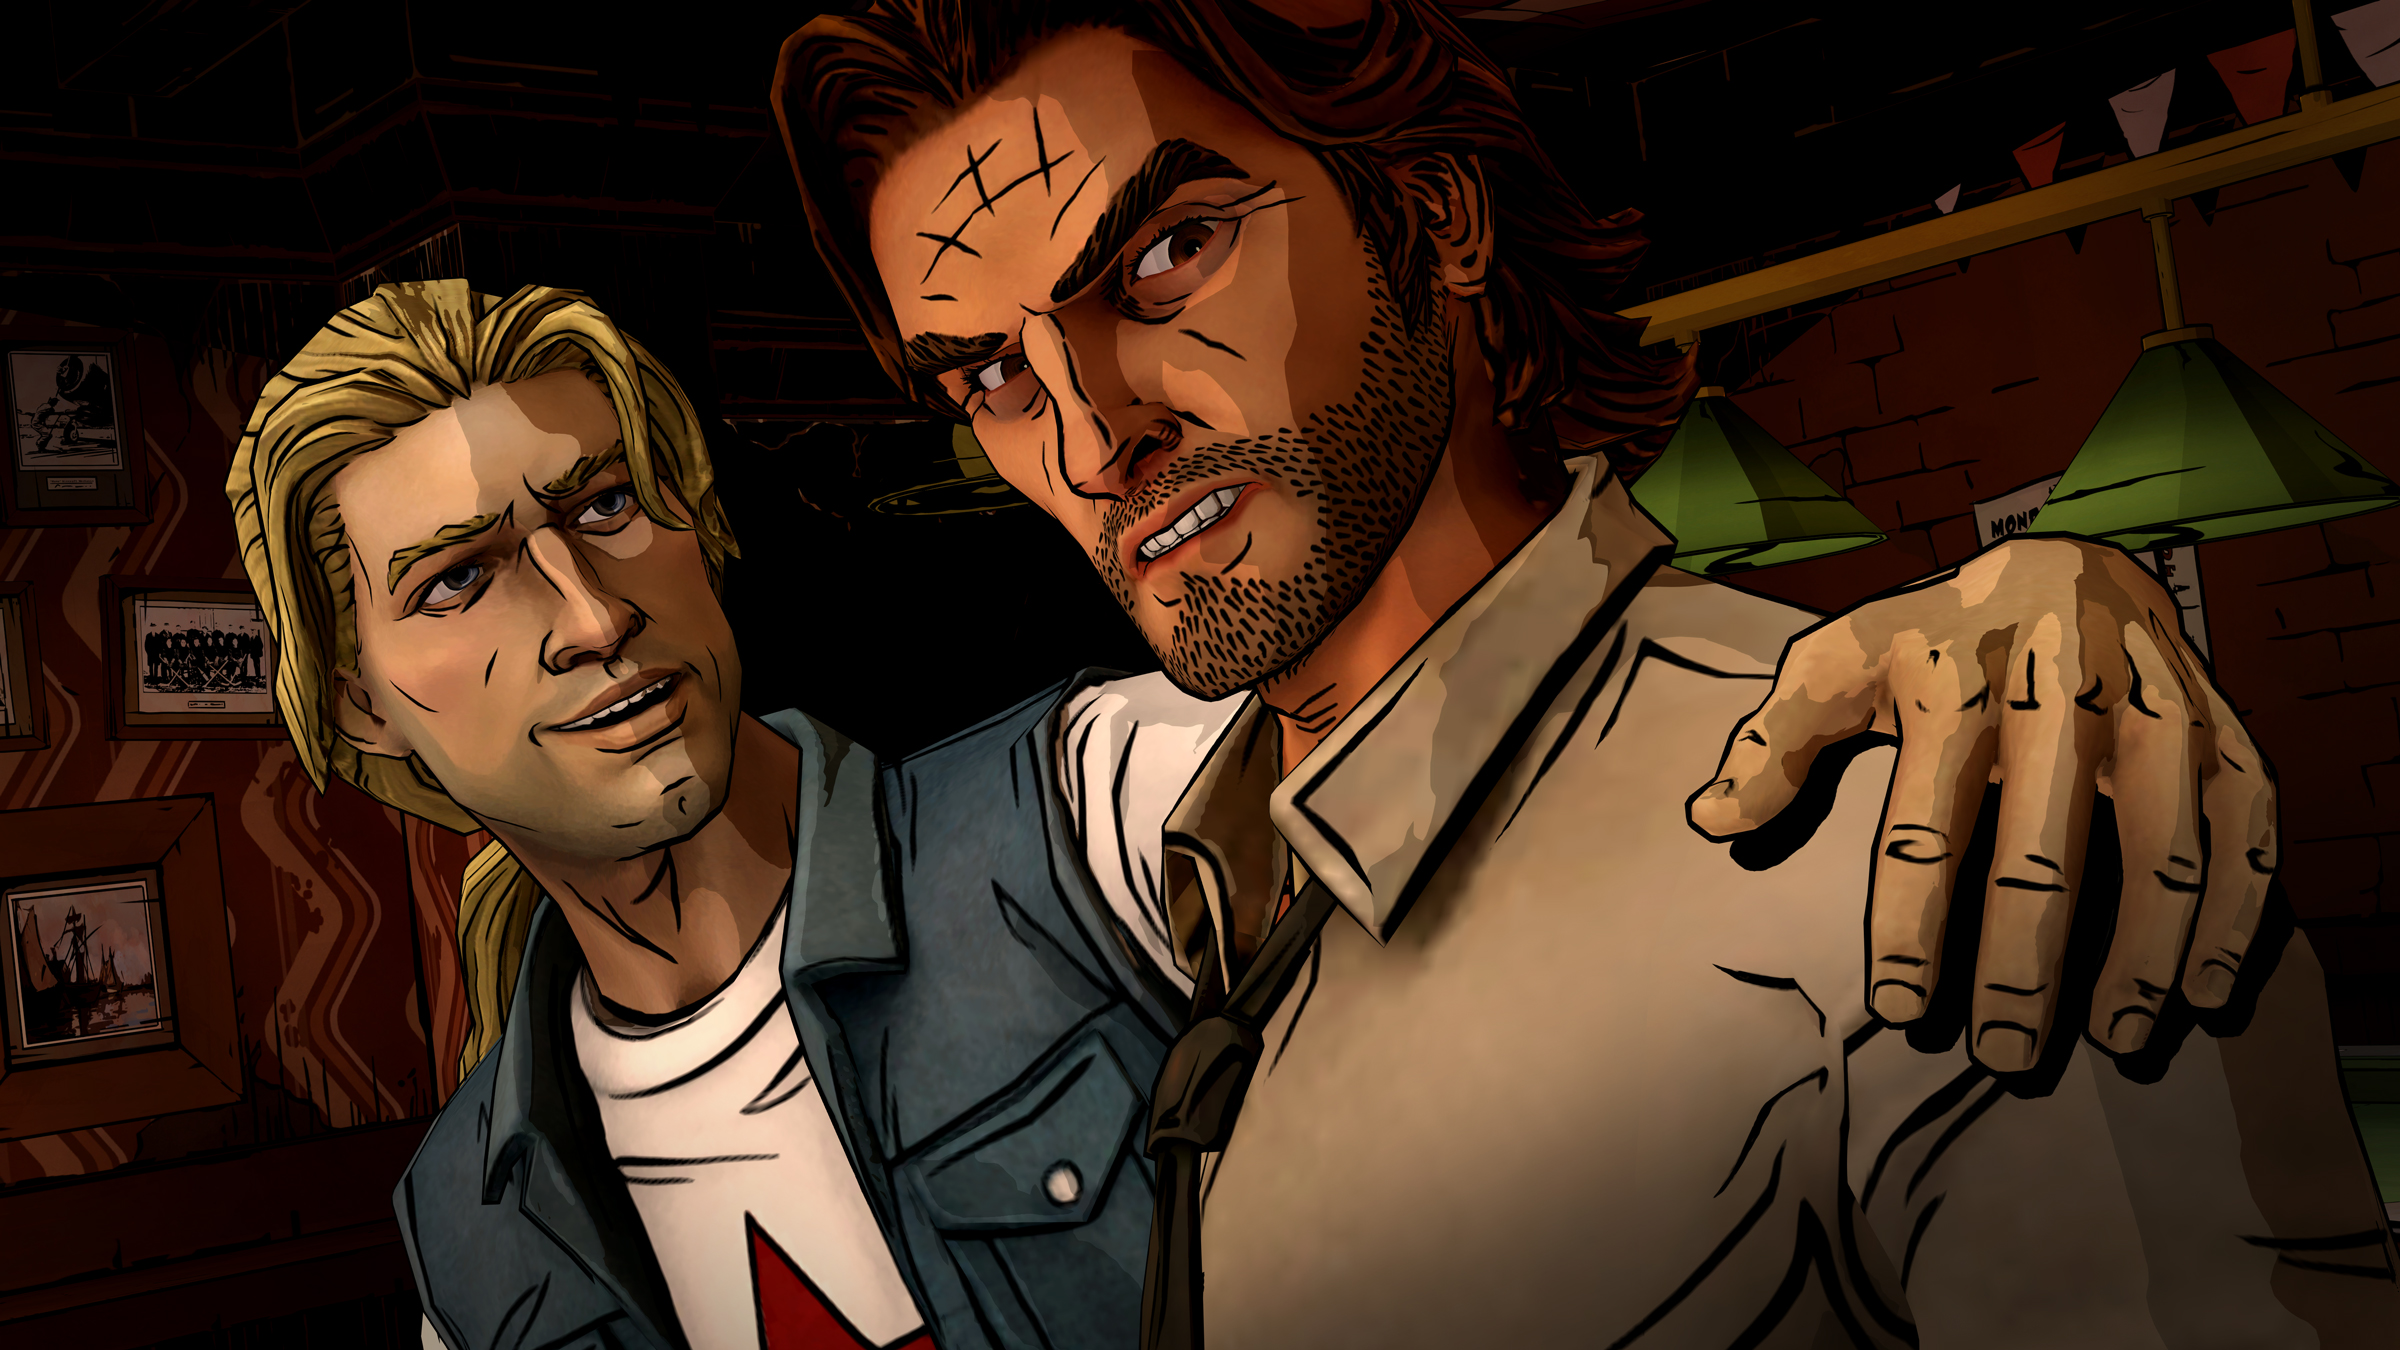 Wolf Among Us season pass holders can now play Episode 2